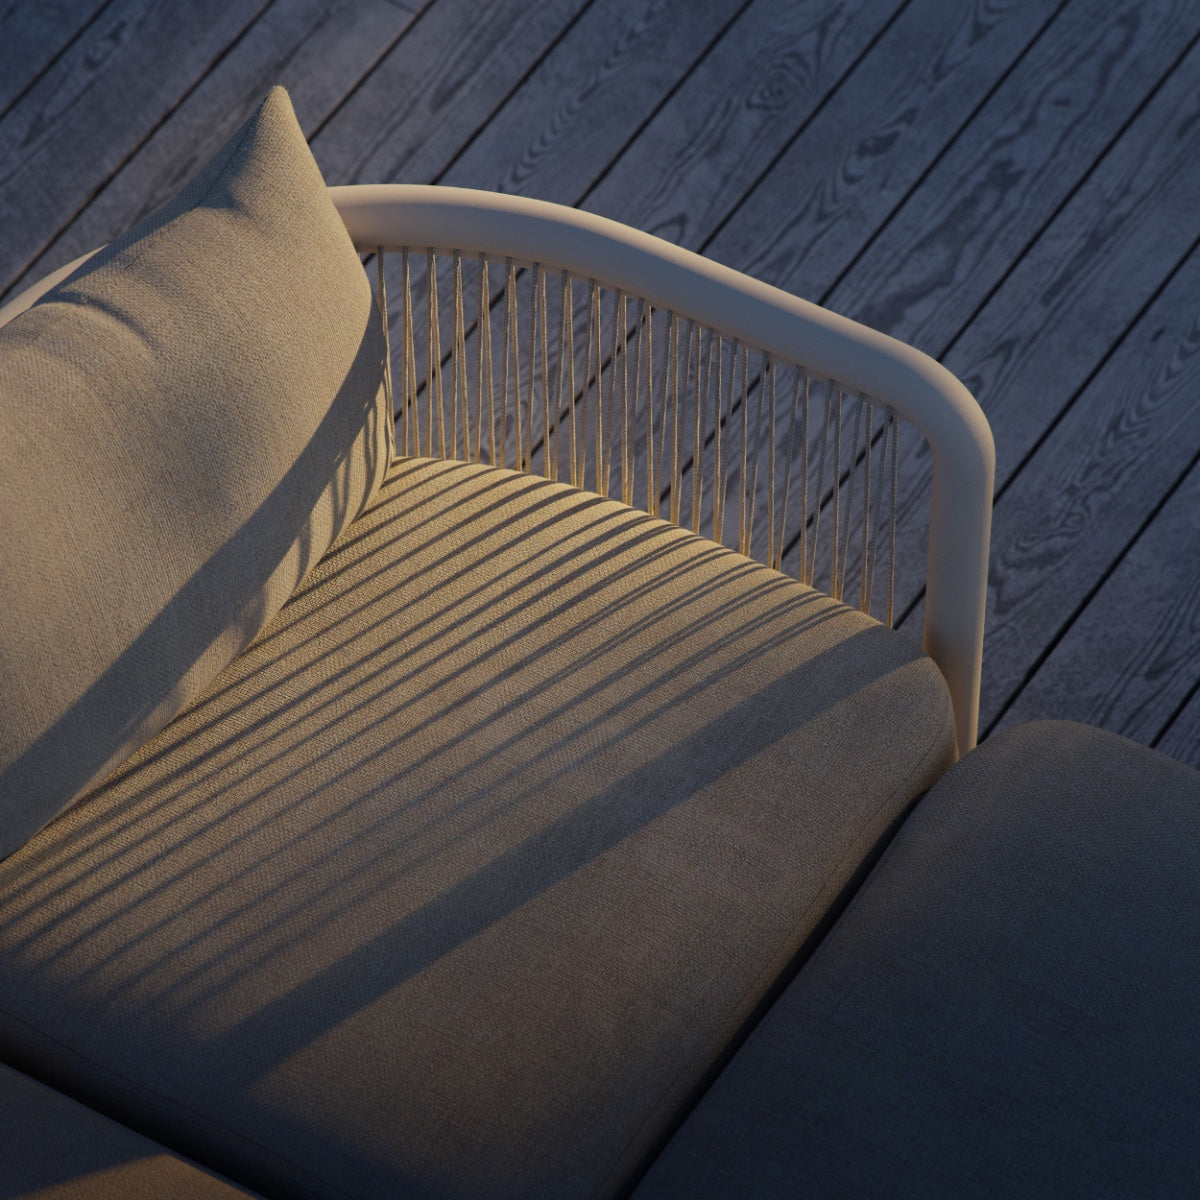 Kirra Lounge Chair [Contract]